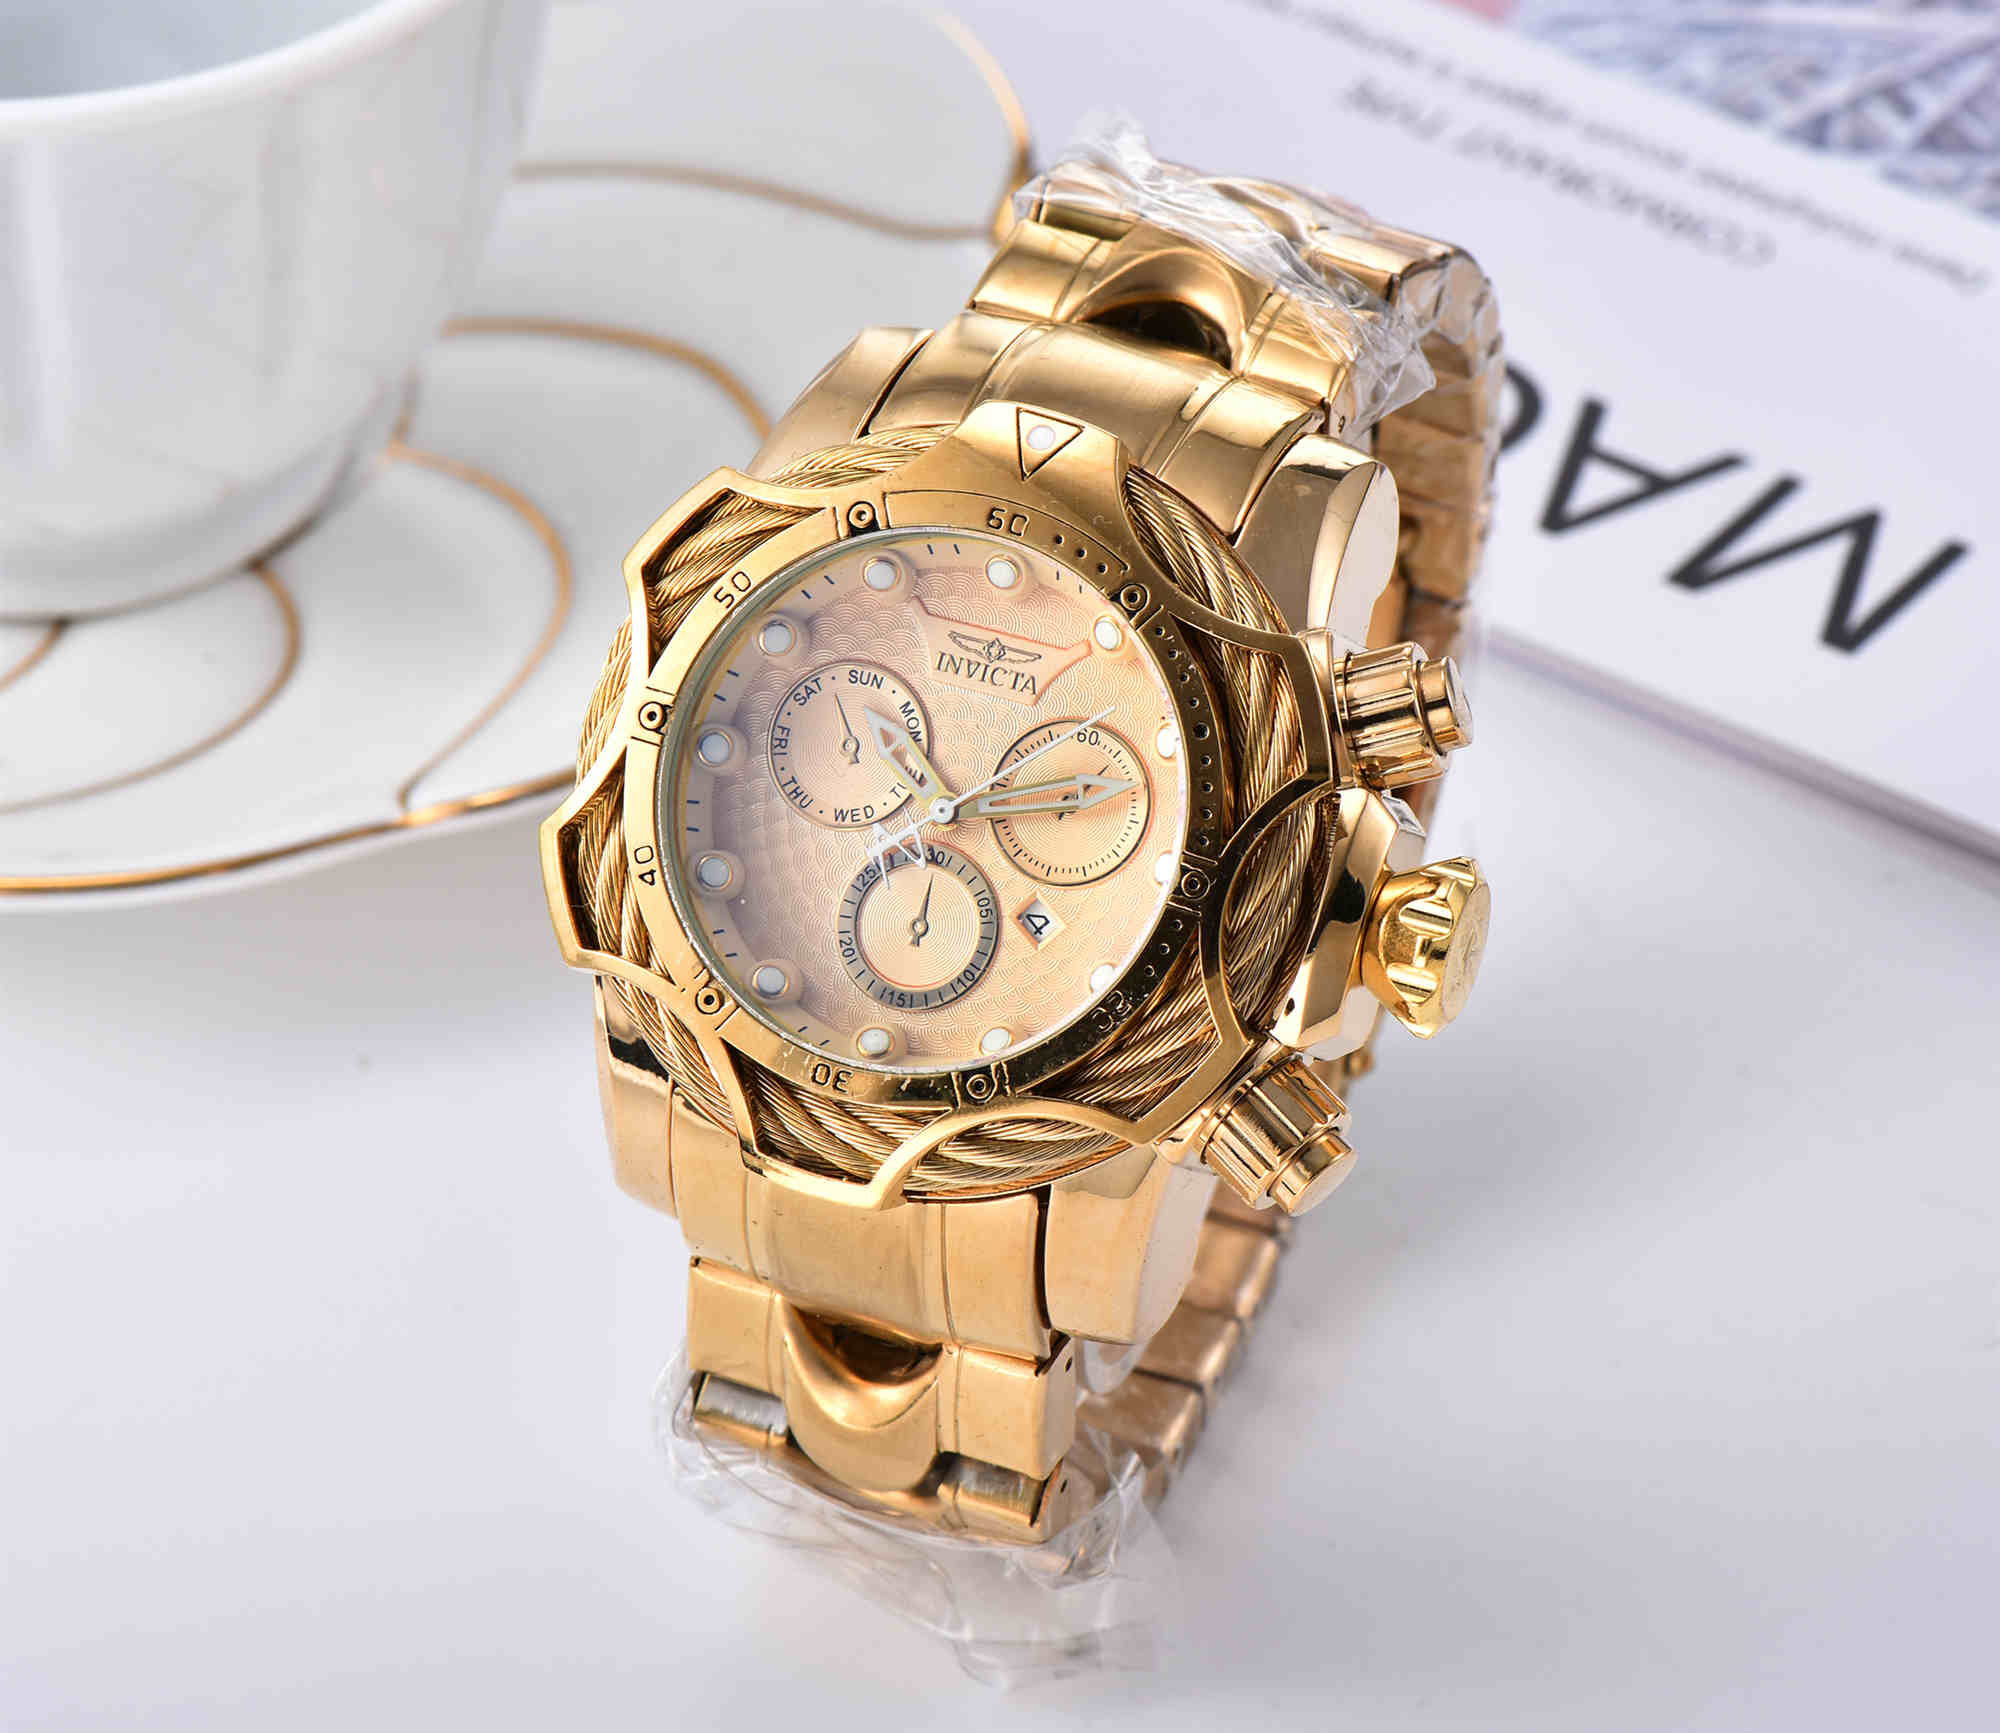 

2020 Hot Selling INVICTA Brand Watches Mens Watch Classic Style Large Dial Auto Date Fashion Rose Gold Watch relojes de marca, Slivery;brown